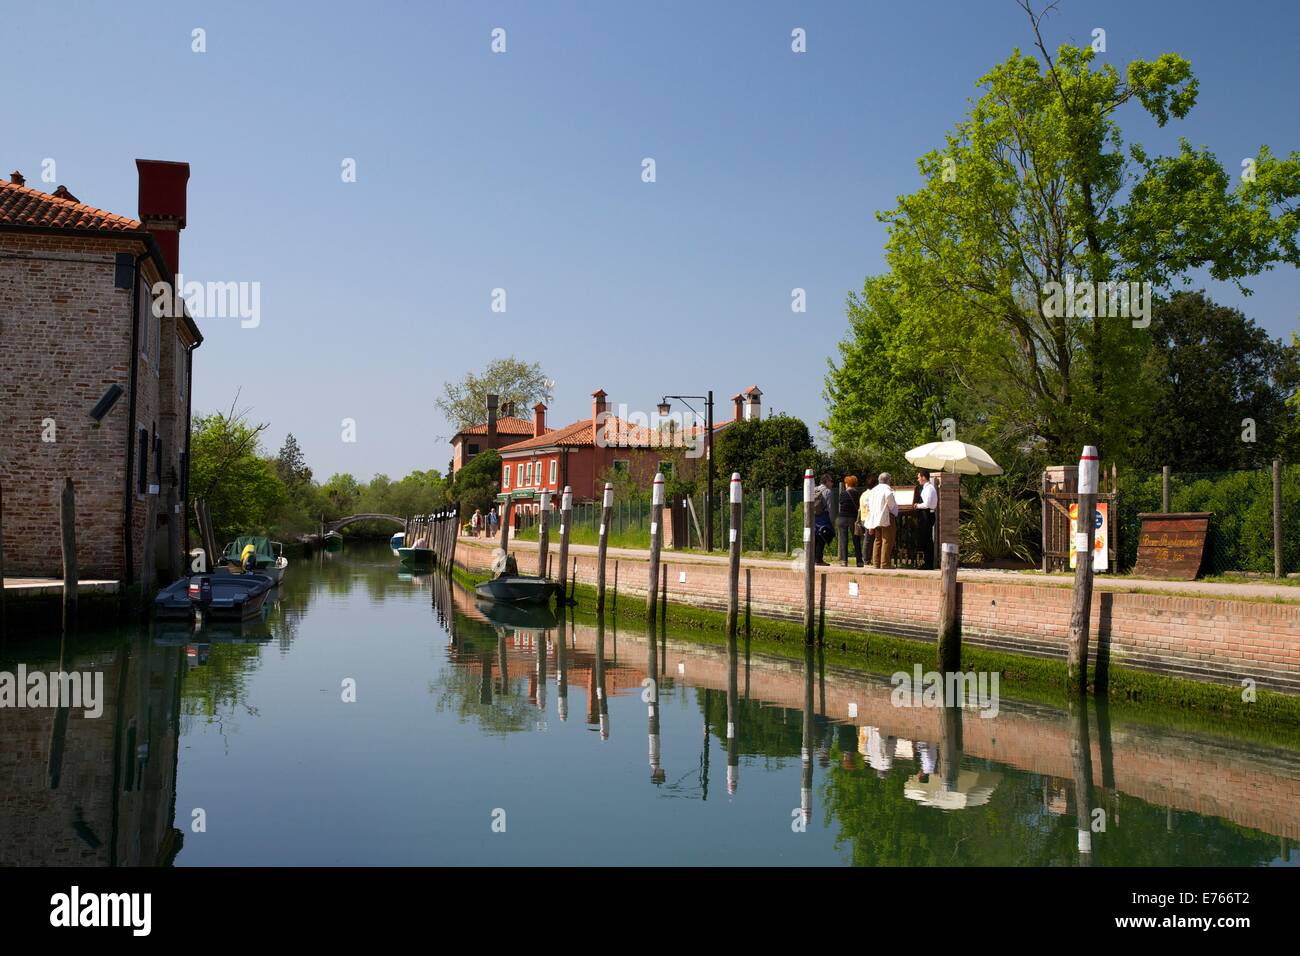 Central canal, Torcello Island, Lagoon, Venice, Italy, Europe Stock Photo